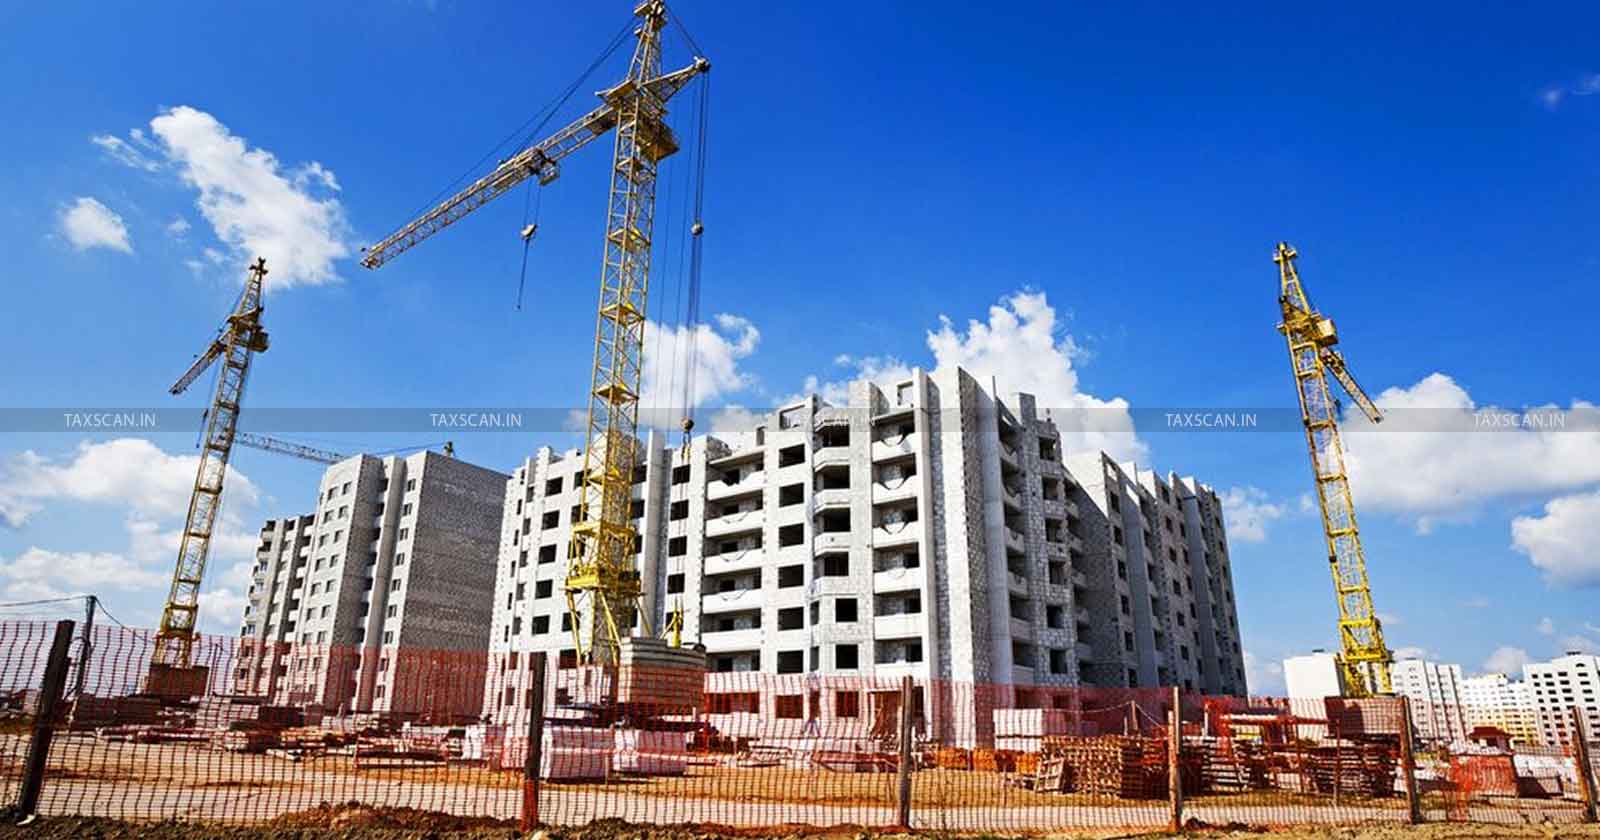 No Service Tax - Service Tax - No Service Tax on Construction of Residential Complex - Construction of Residential Complex - Residential Complex - taxscan